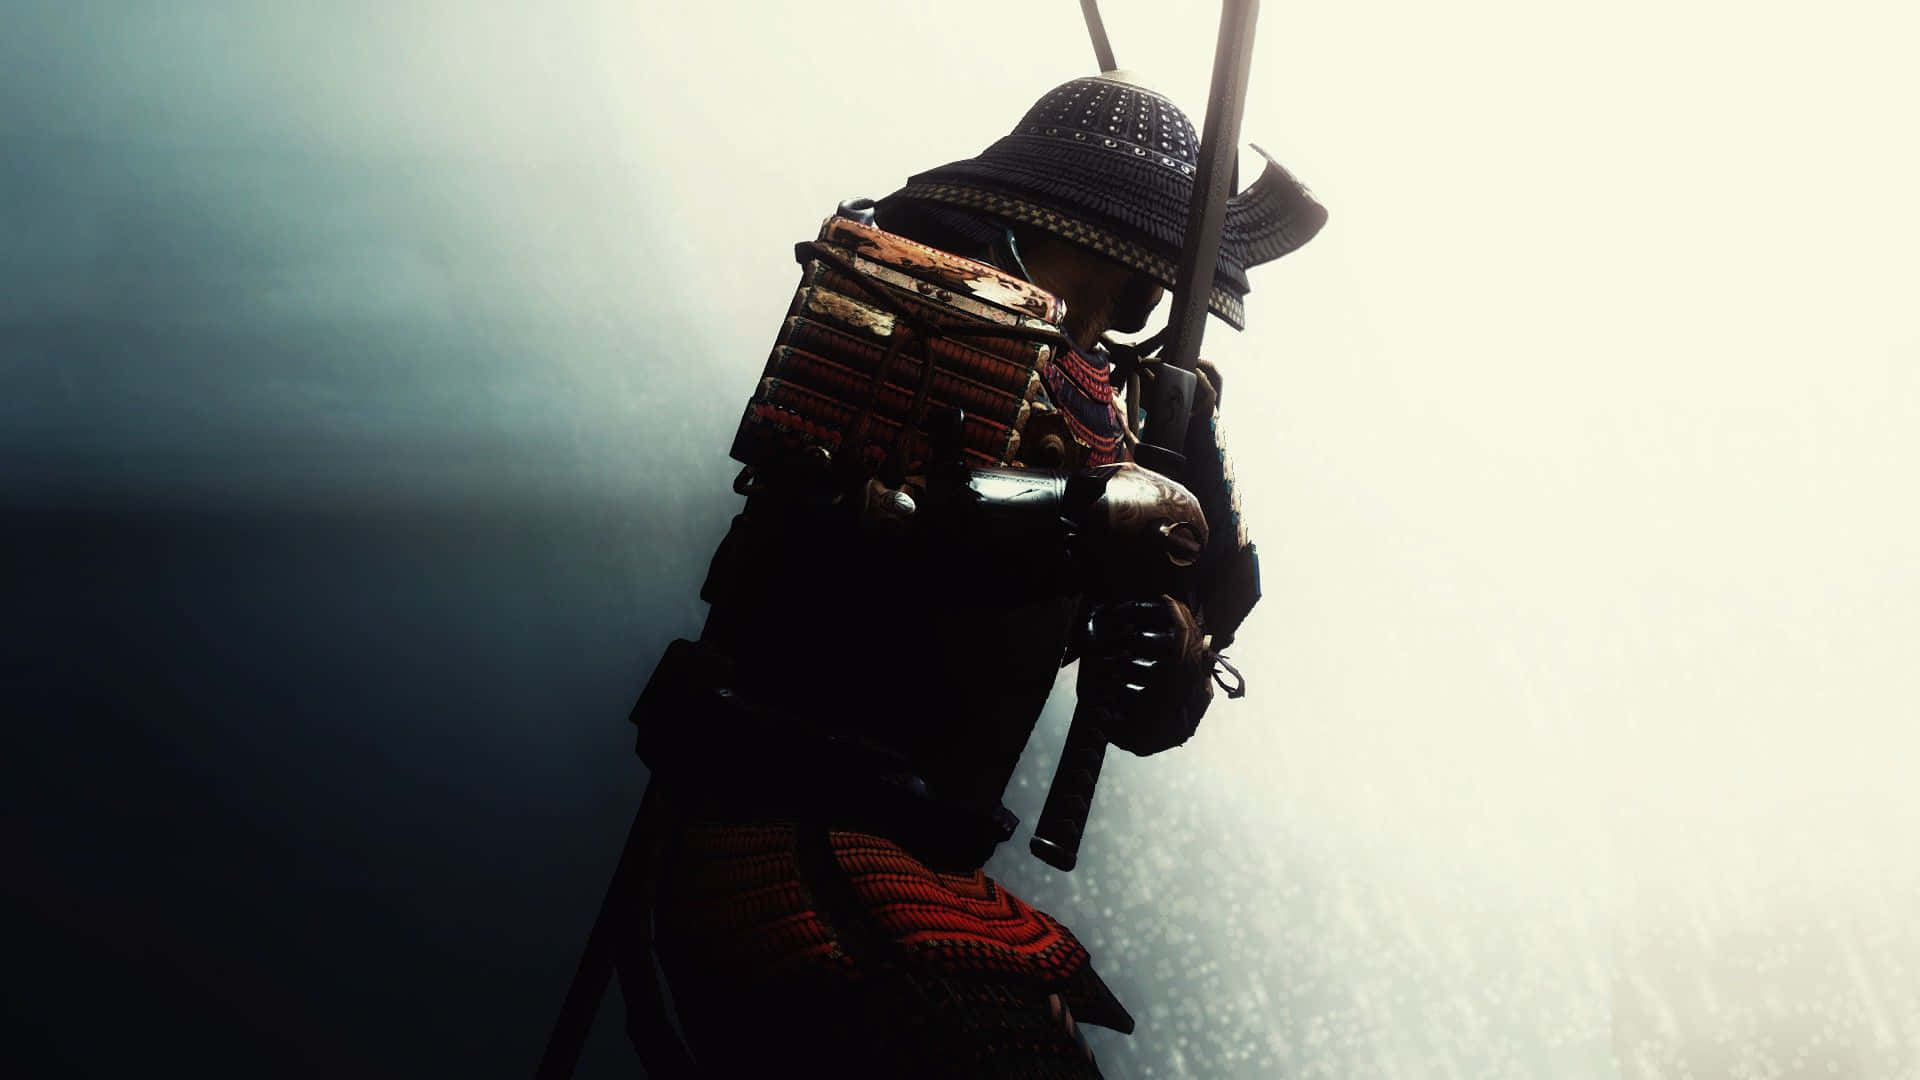 A Samurai dressed in full armor poised with a sword